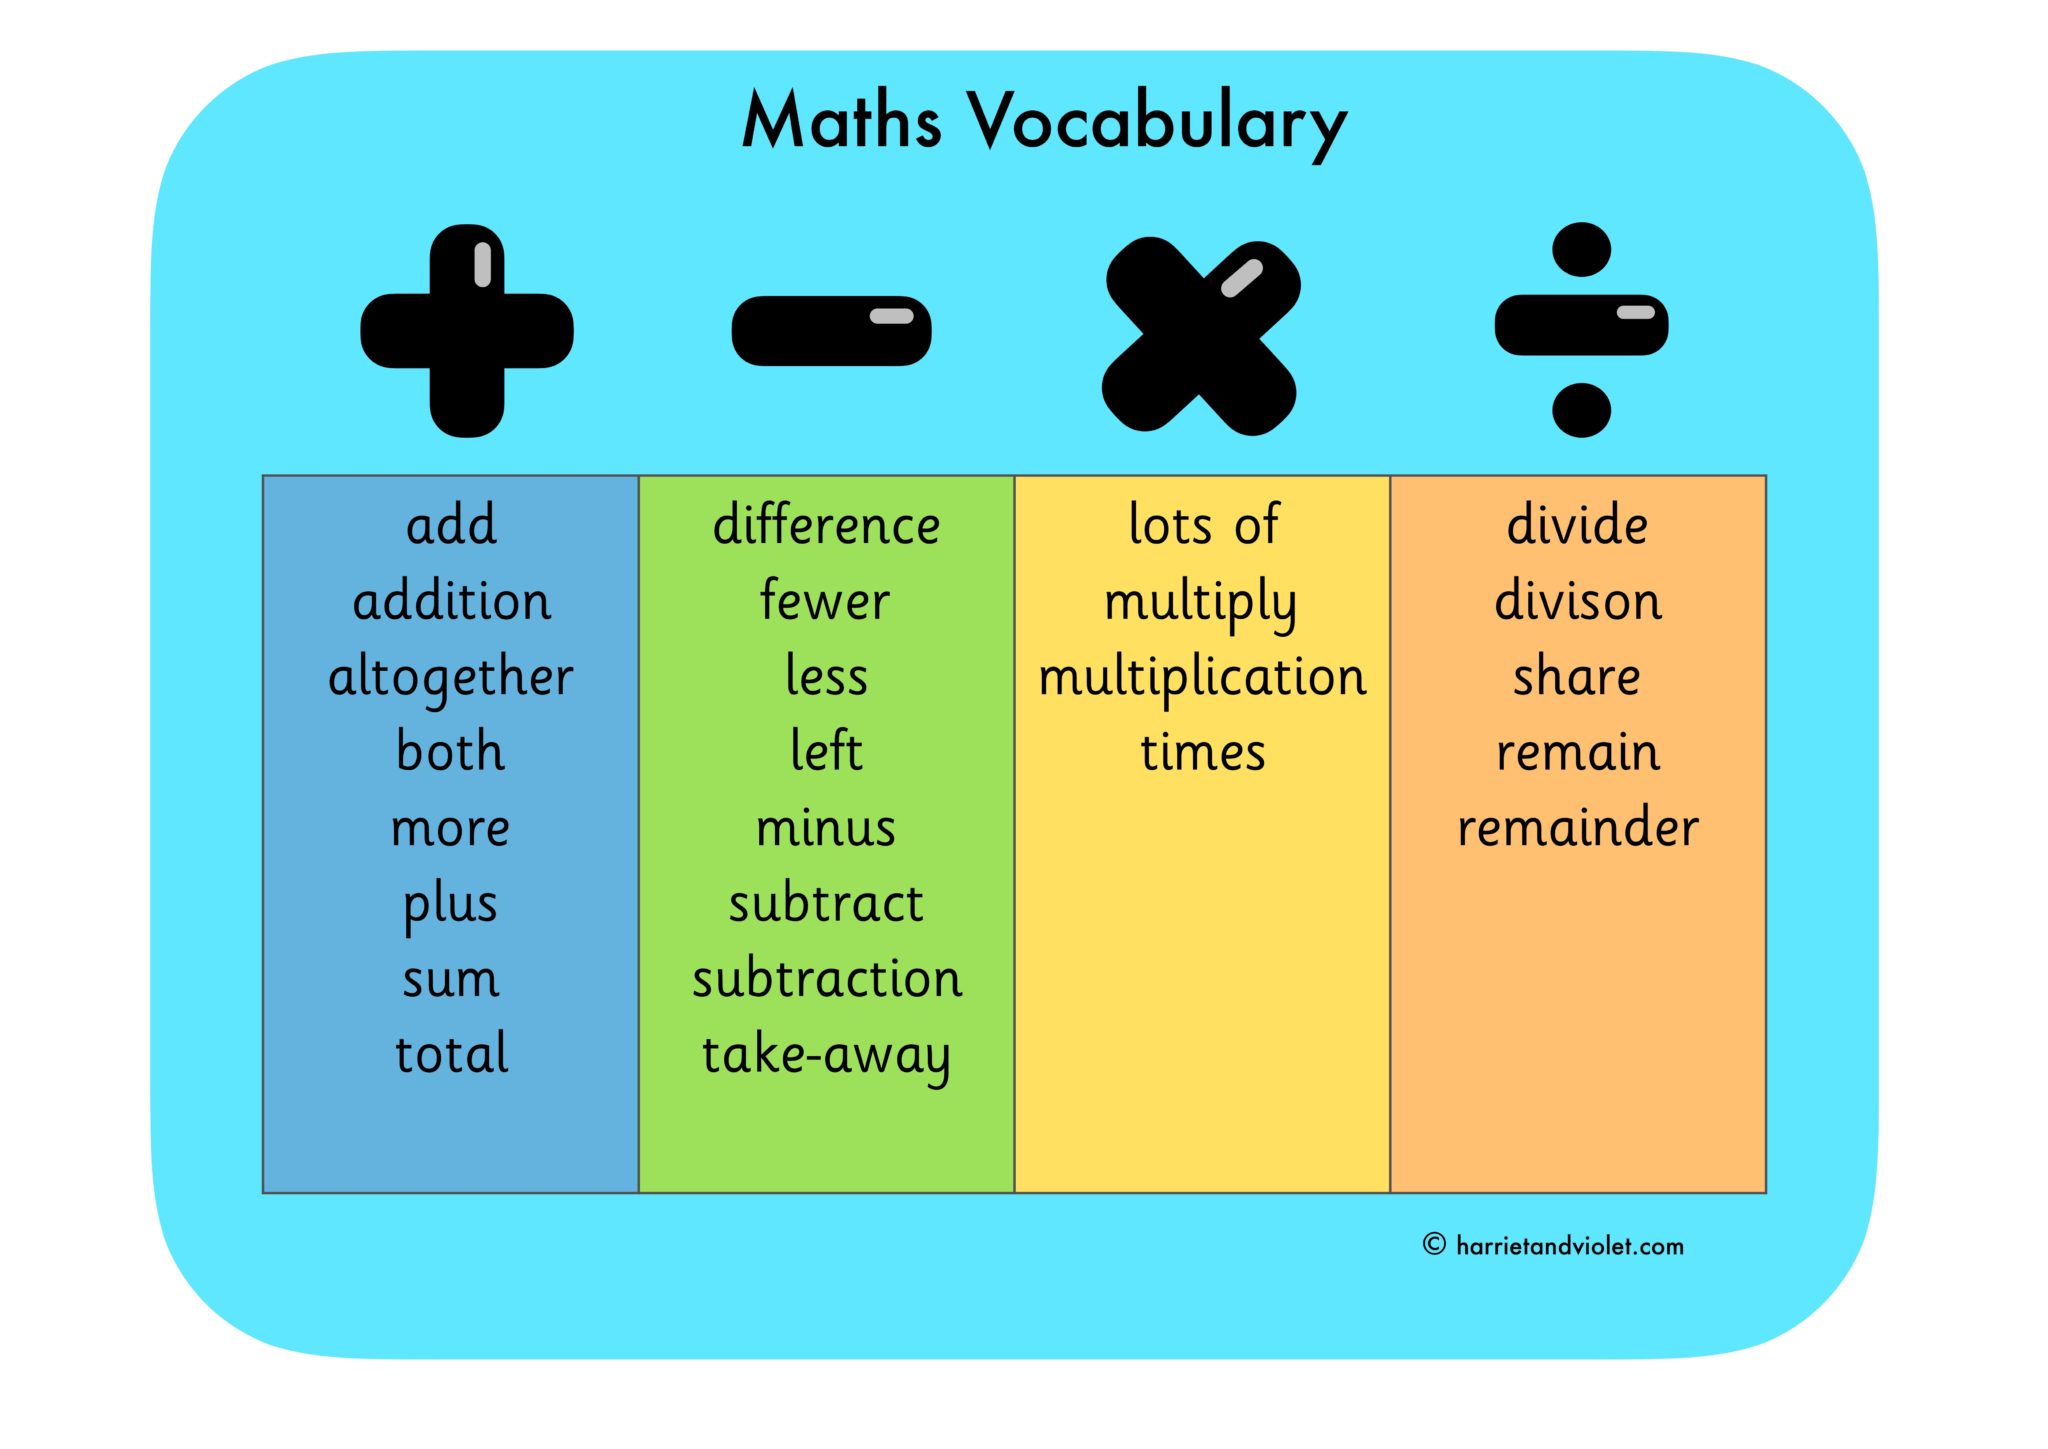 Been new topic. Математика Vocabulary. Mathematical terms in English. Maths in English. Math English Vocabulary.